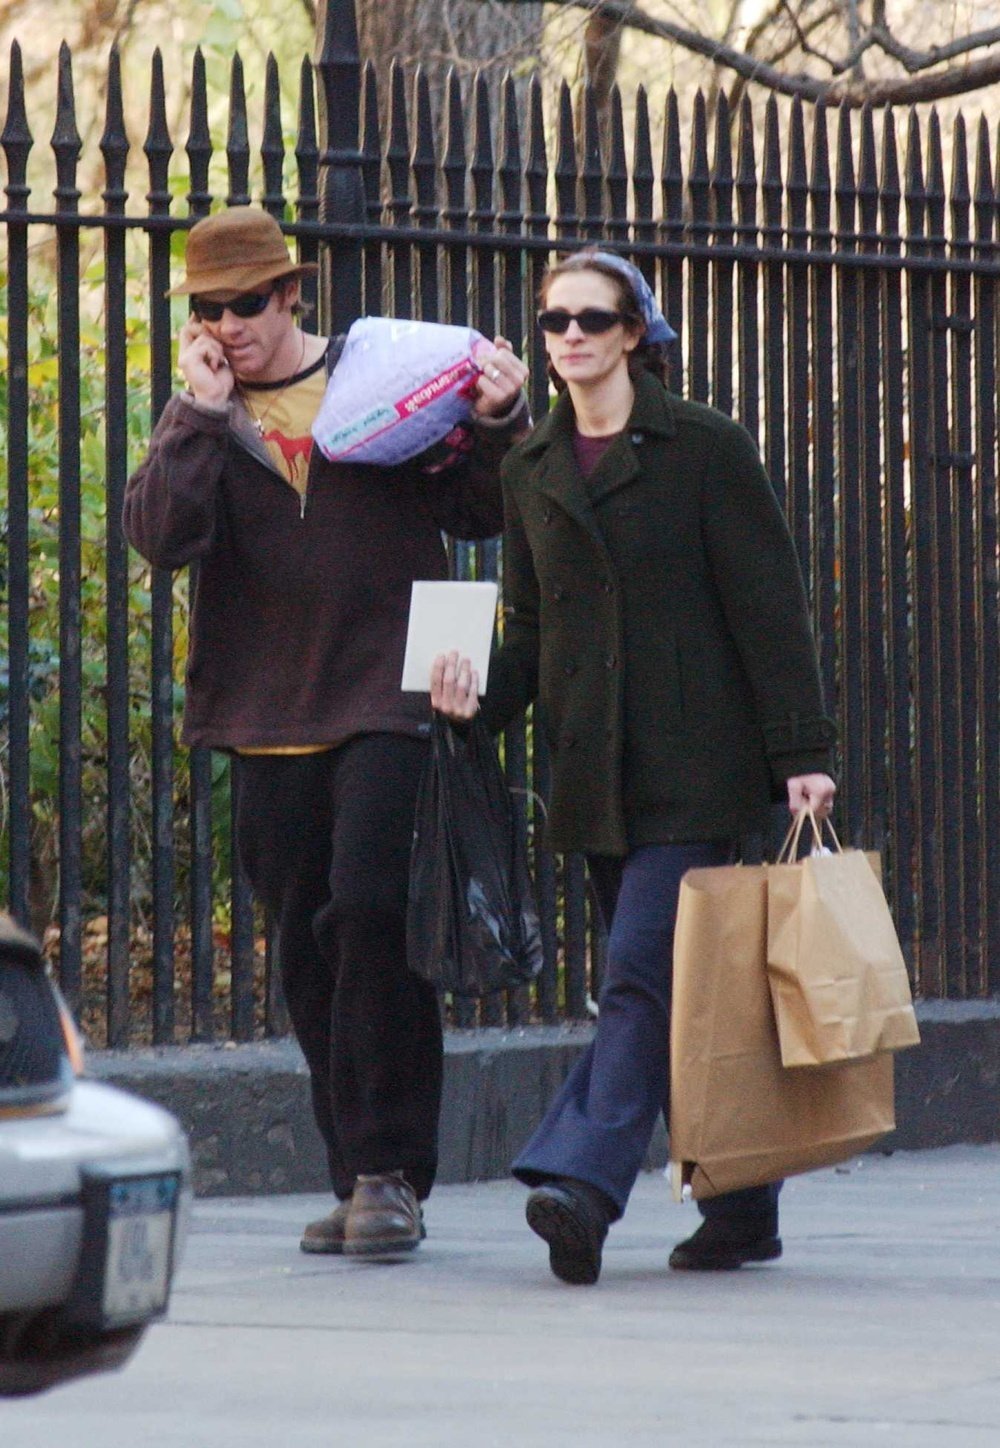 NEW YORK - NOVEMBER 24:  Julia Roberts (R) and her husband Danny Moder walk November 24, 2002 in New York City.  (Photo by Mario Magnani/Getty Images)